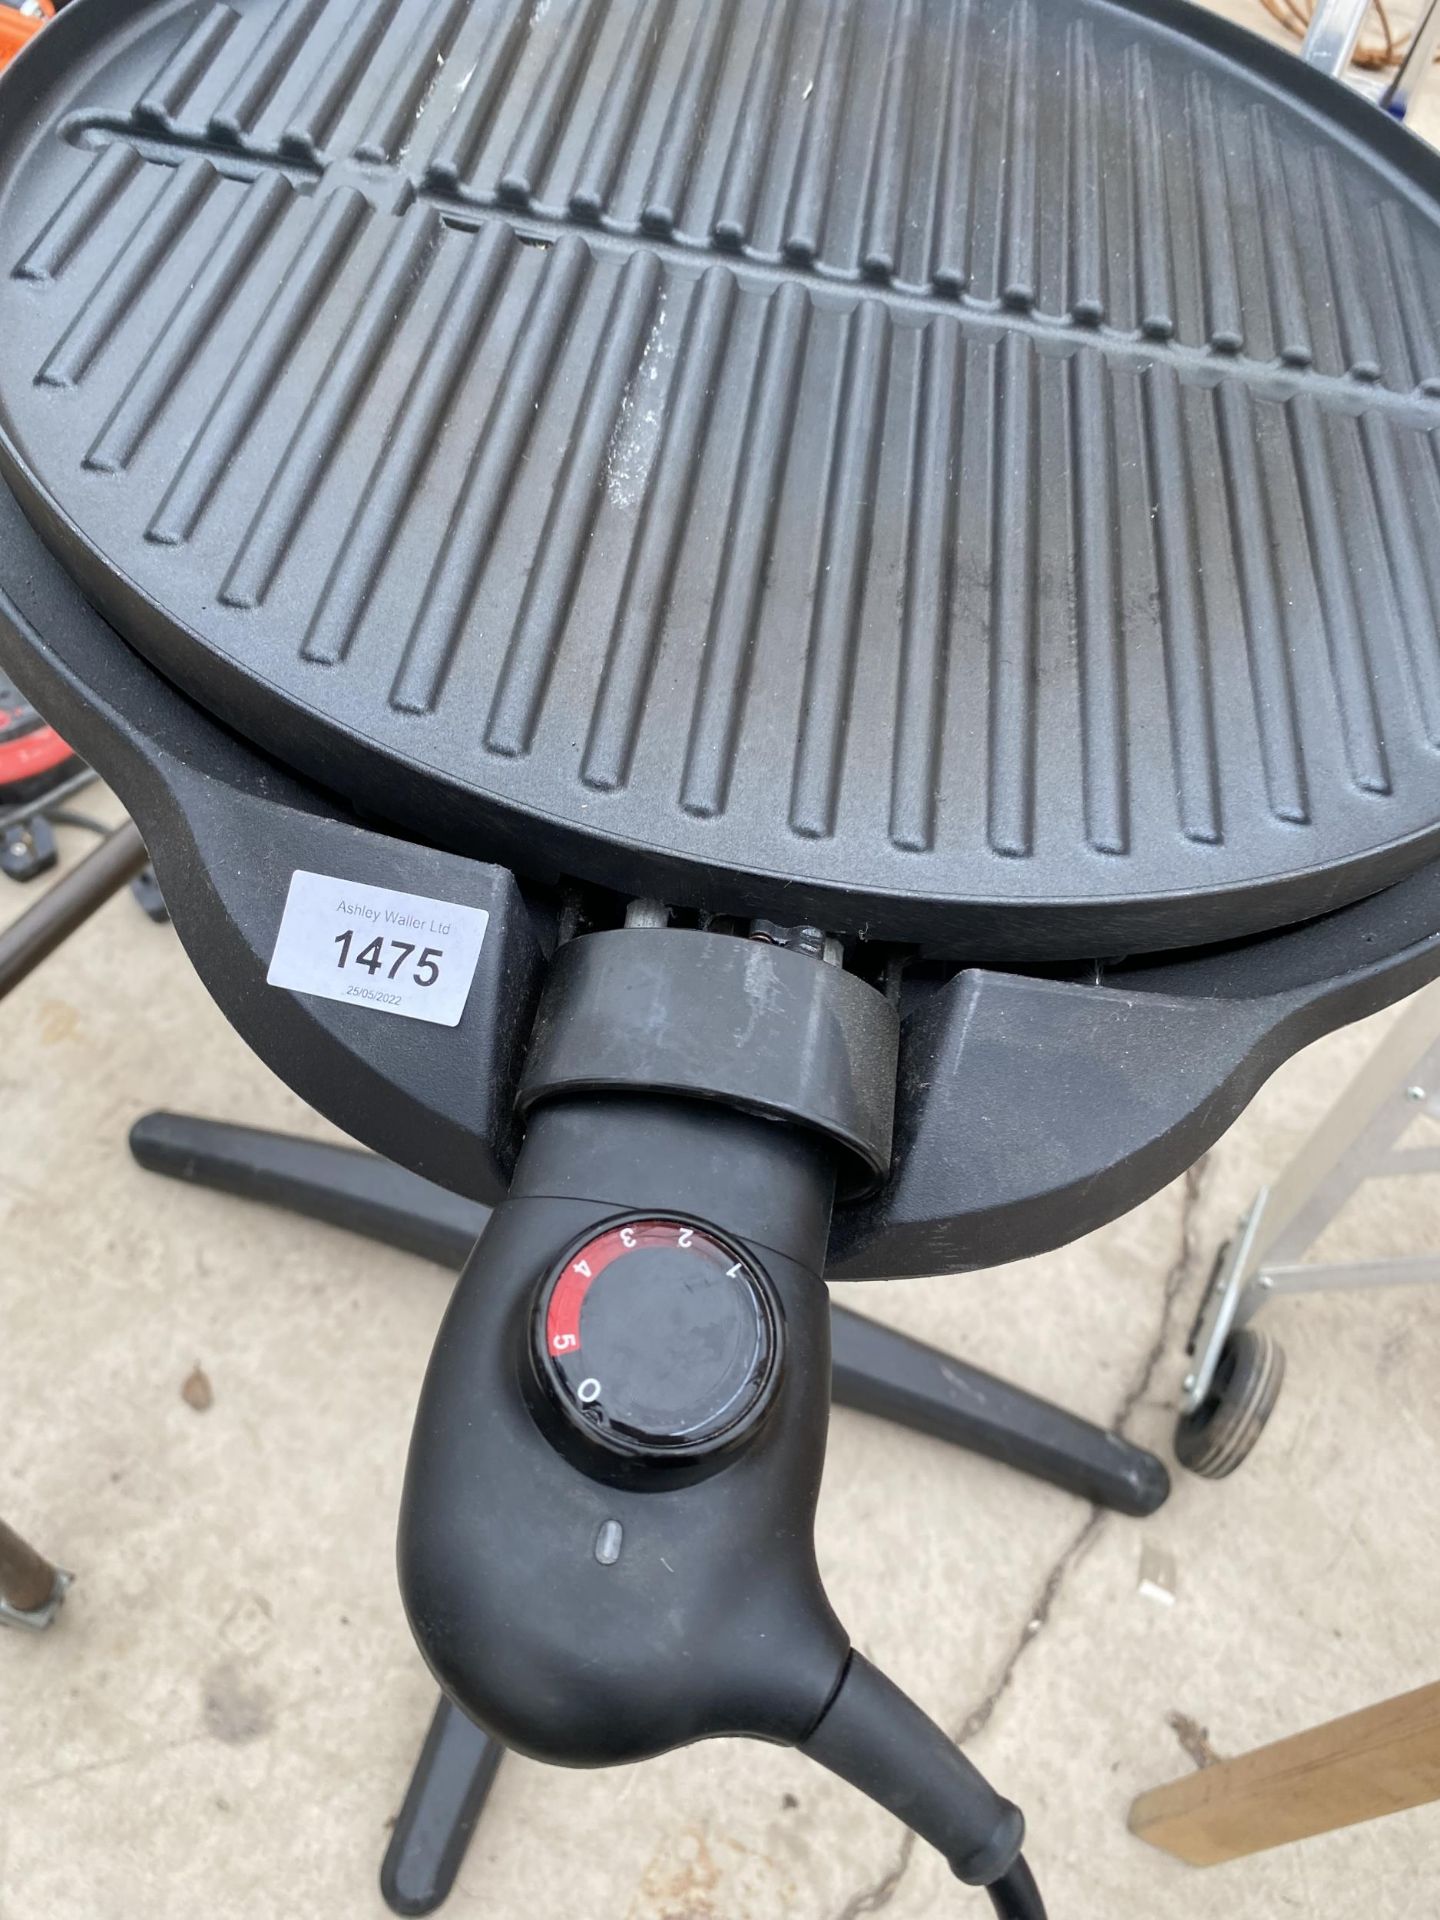 A GEORGE FORMAN ELECTRIC BBQ/GRILL - Image 4 of 5